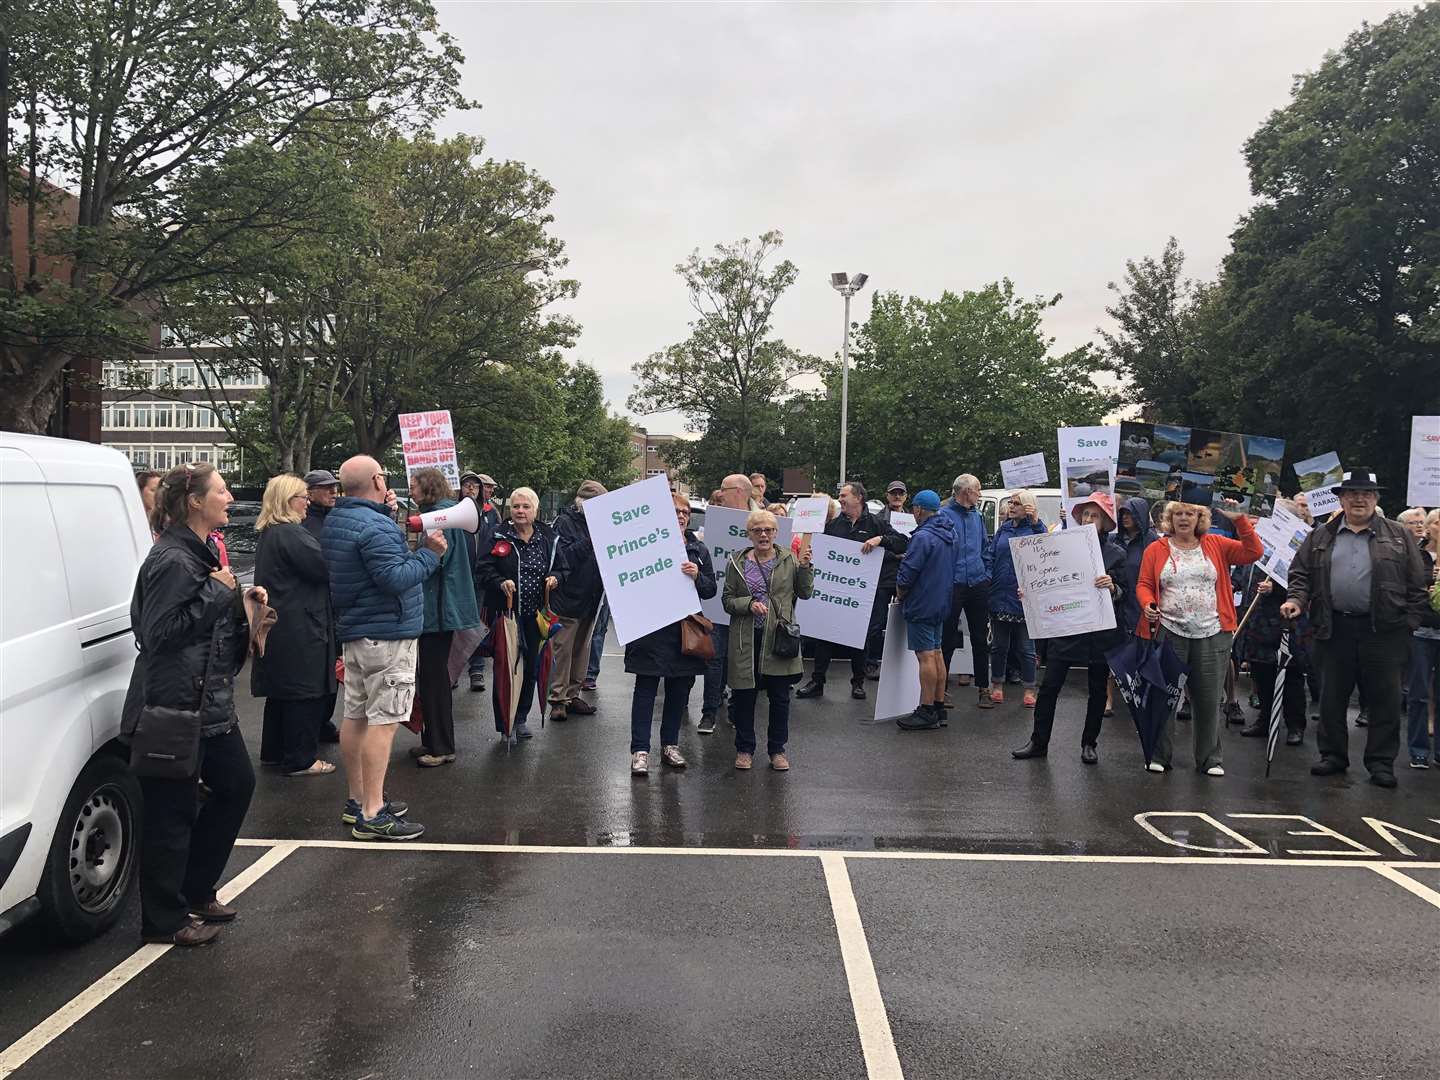 Protesters against the Princes Parade scheme gathered outside Folkestone and Hythe District Council (3835855)